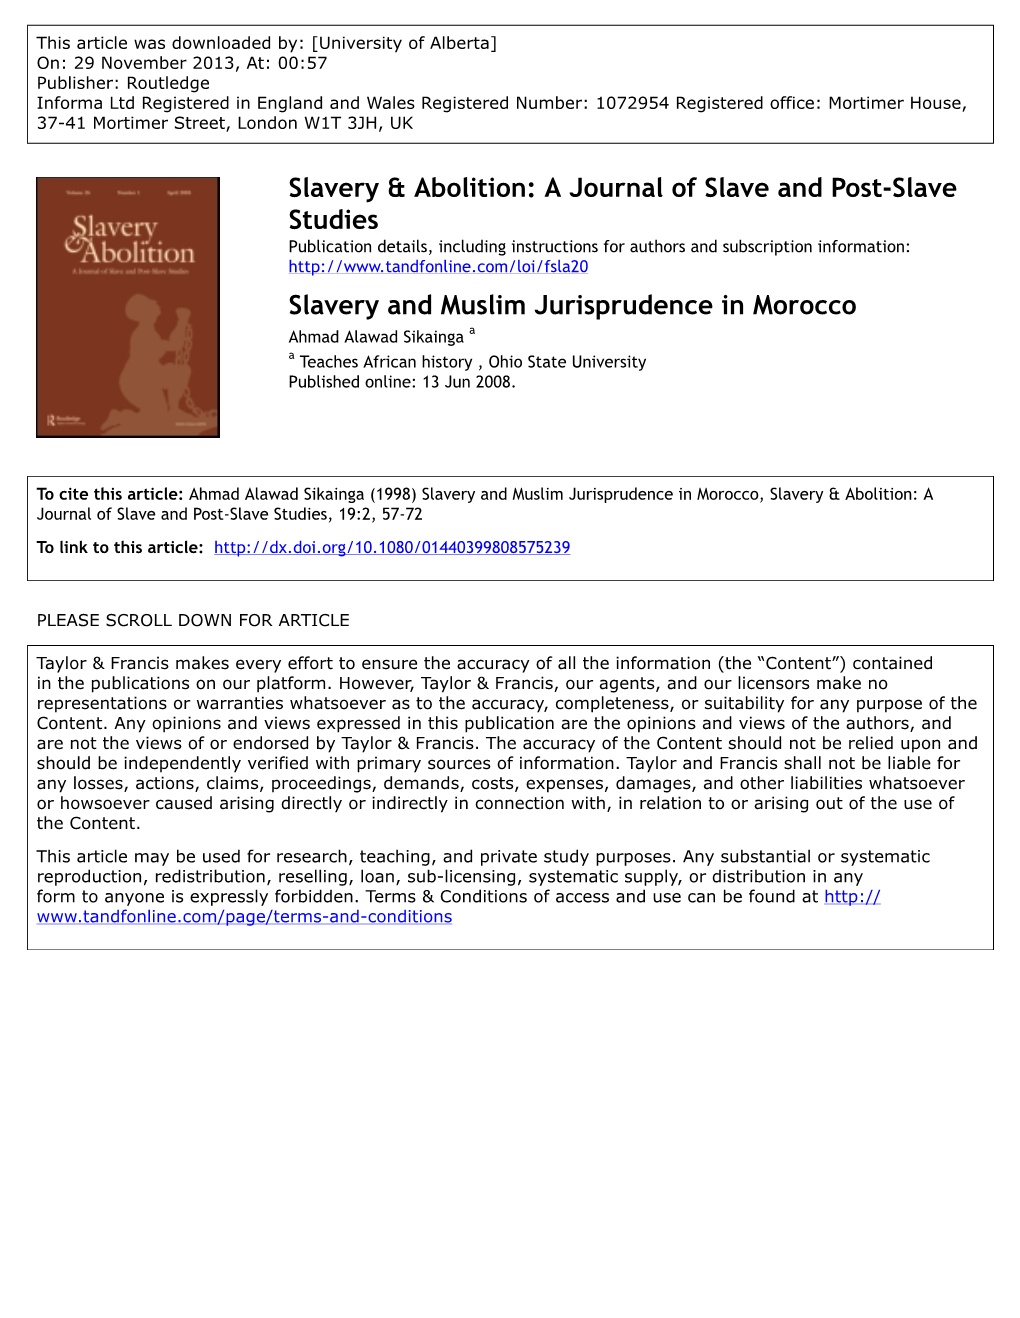 Slavery & Abolition: a Journal of Slave and Post-Slave Studies Slavery and Muslim Jurisprudence in Morocco